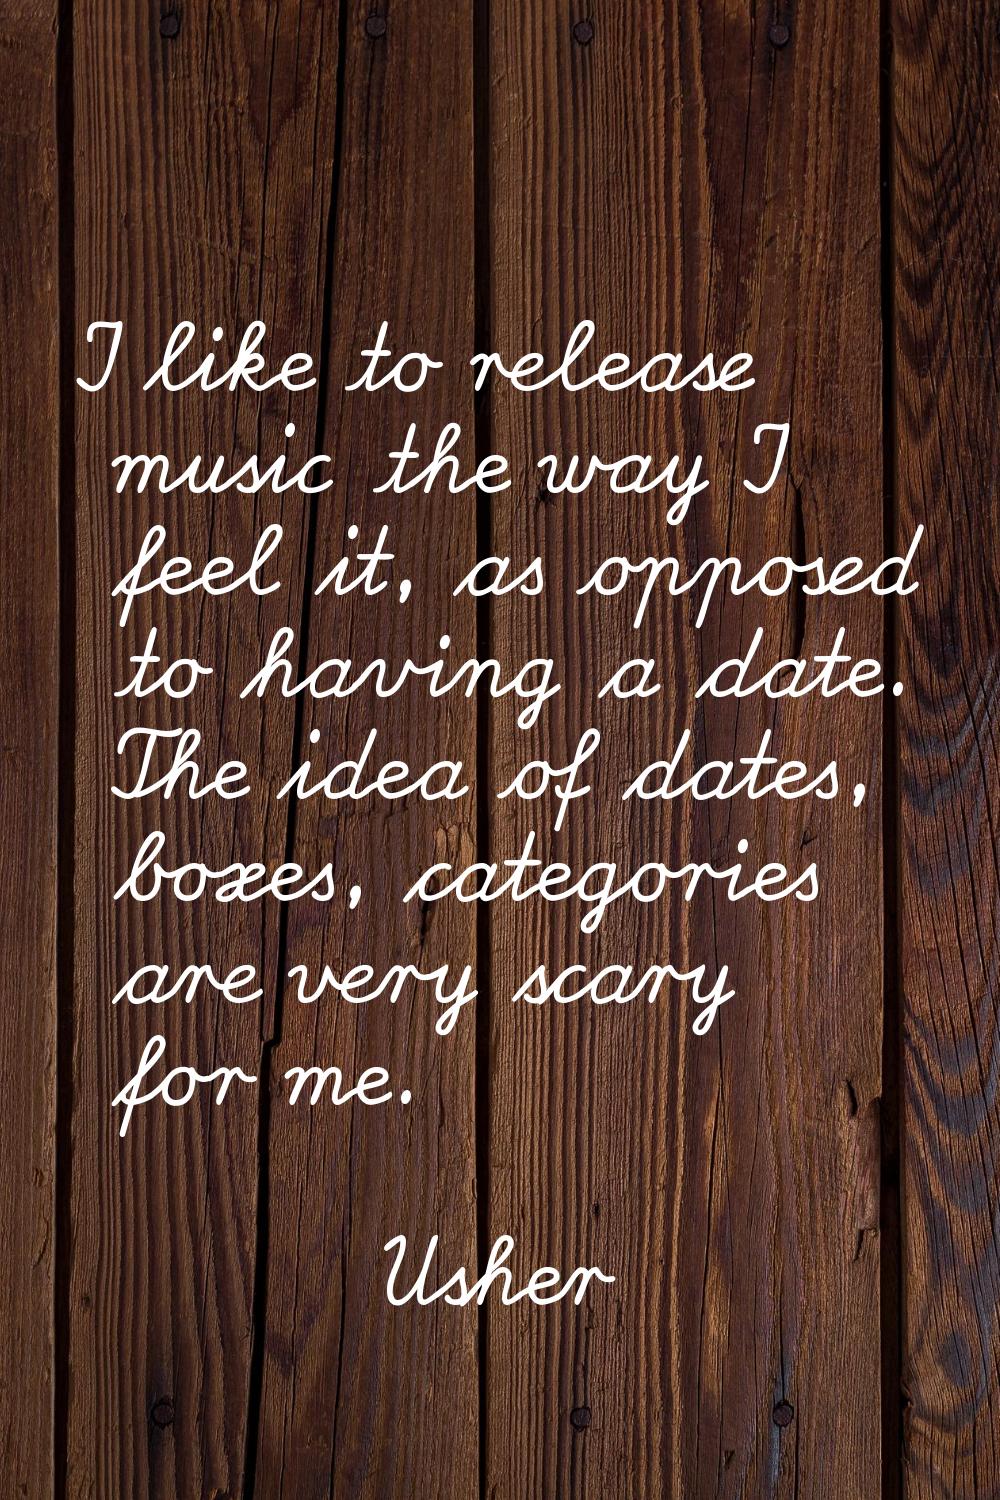 I like to release music the way I feel it, as opposed to having a date. The idea of dates, boxes, c